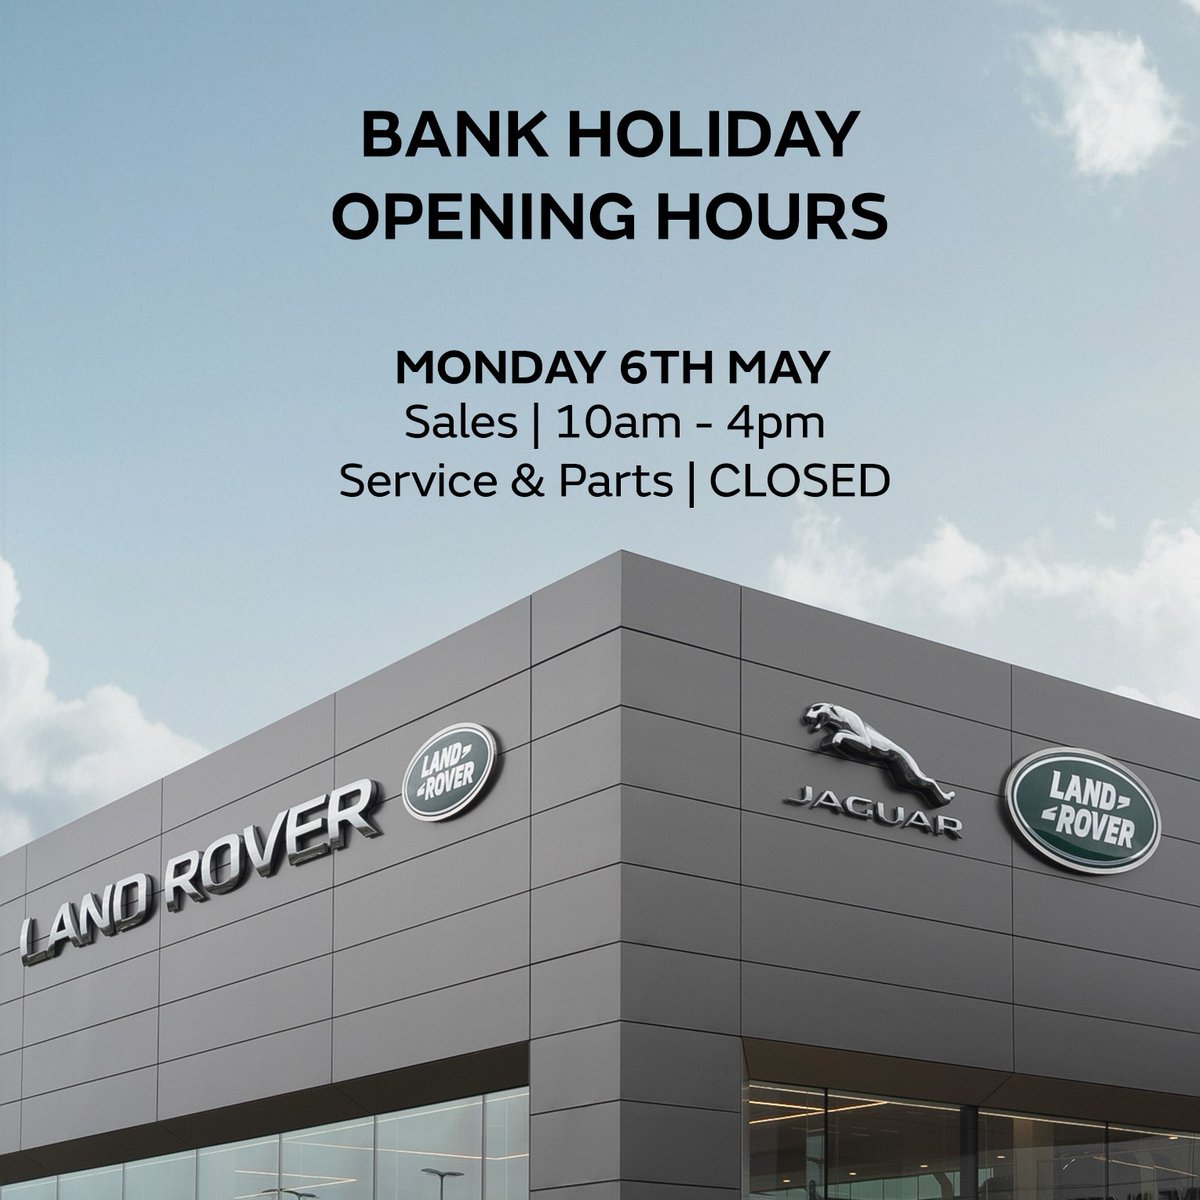 Please take note of our Bank Holiday opening hours.

#bankholiday #openinghours